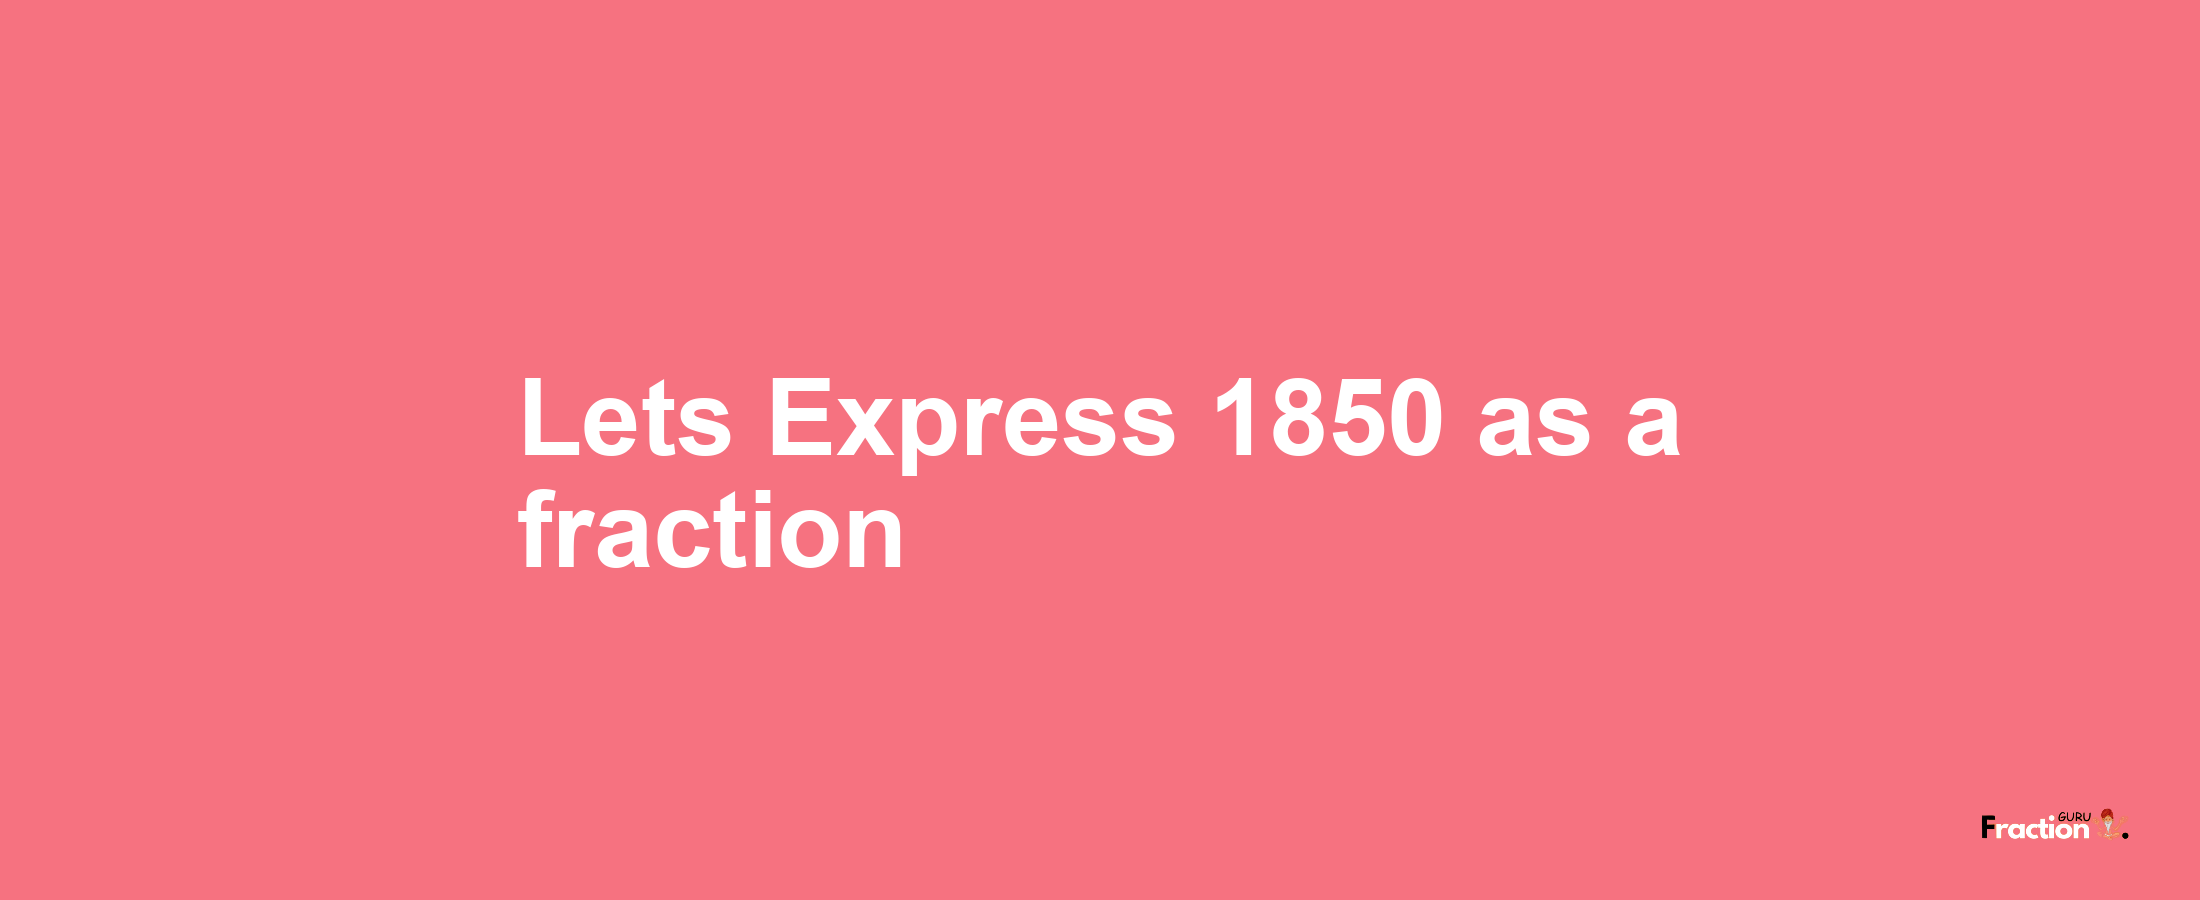 Lets Express 1850 as afraction